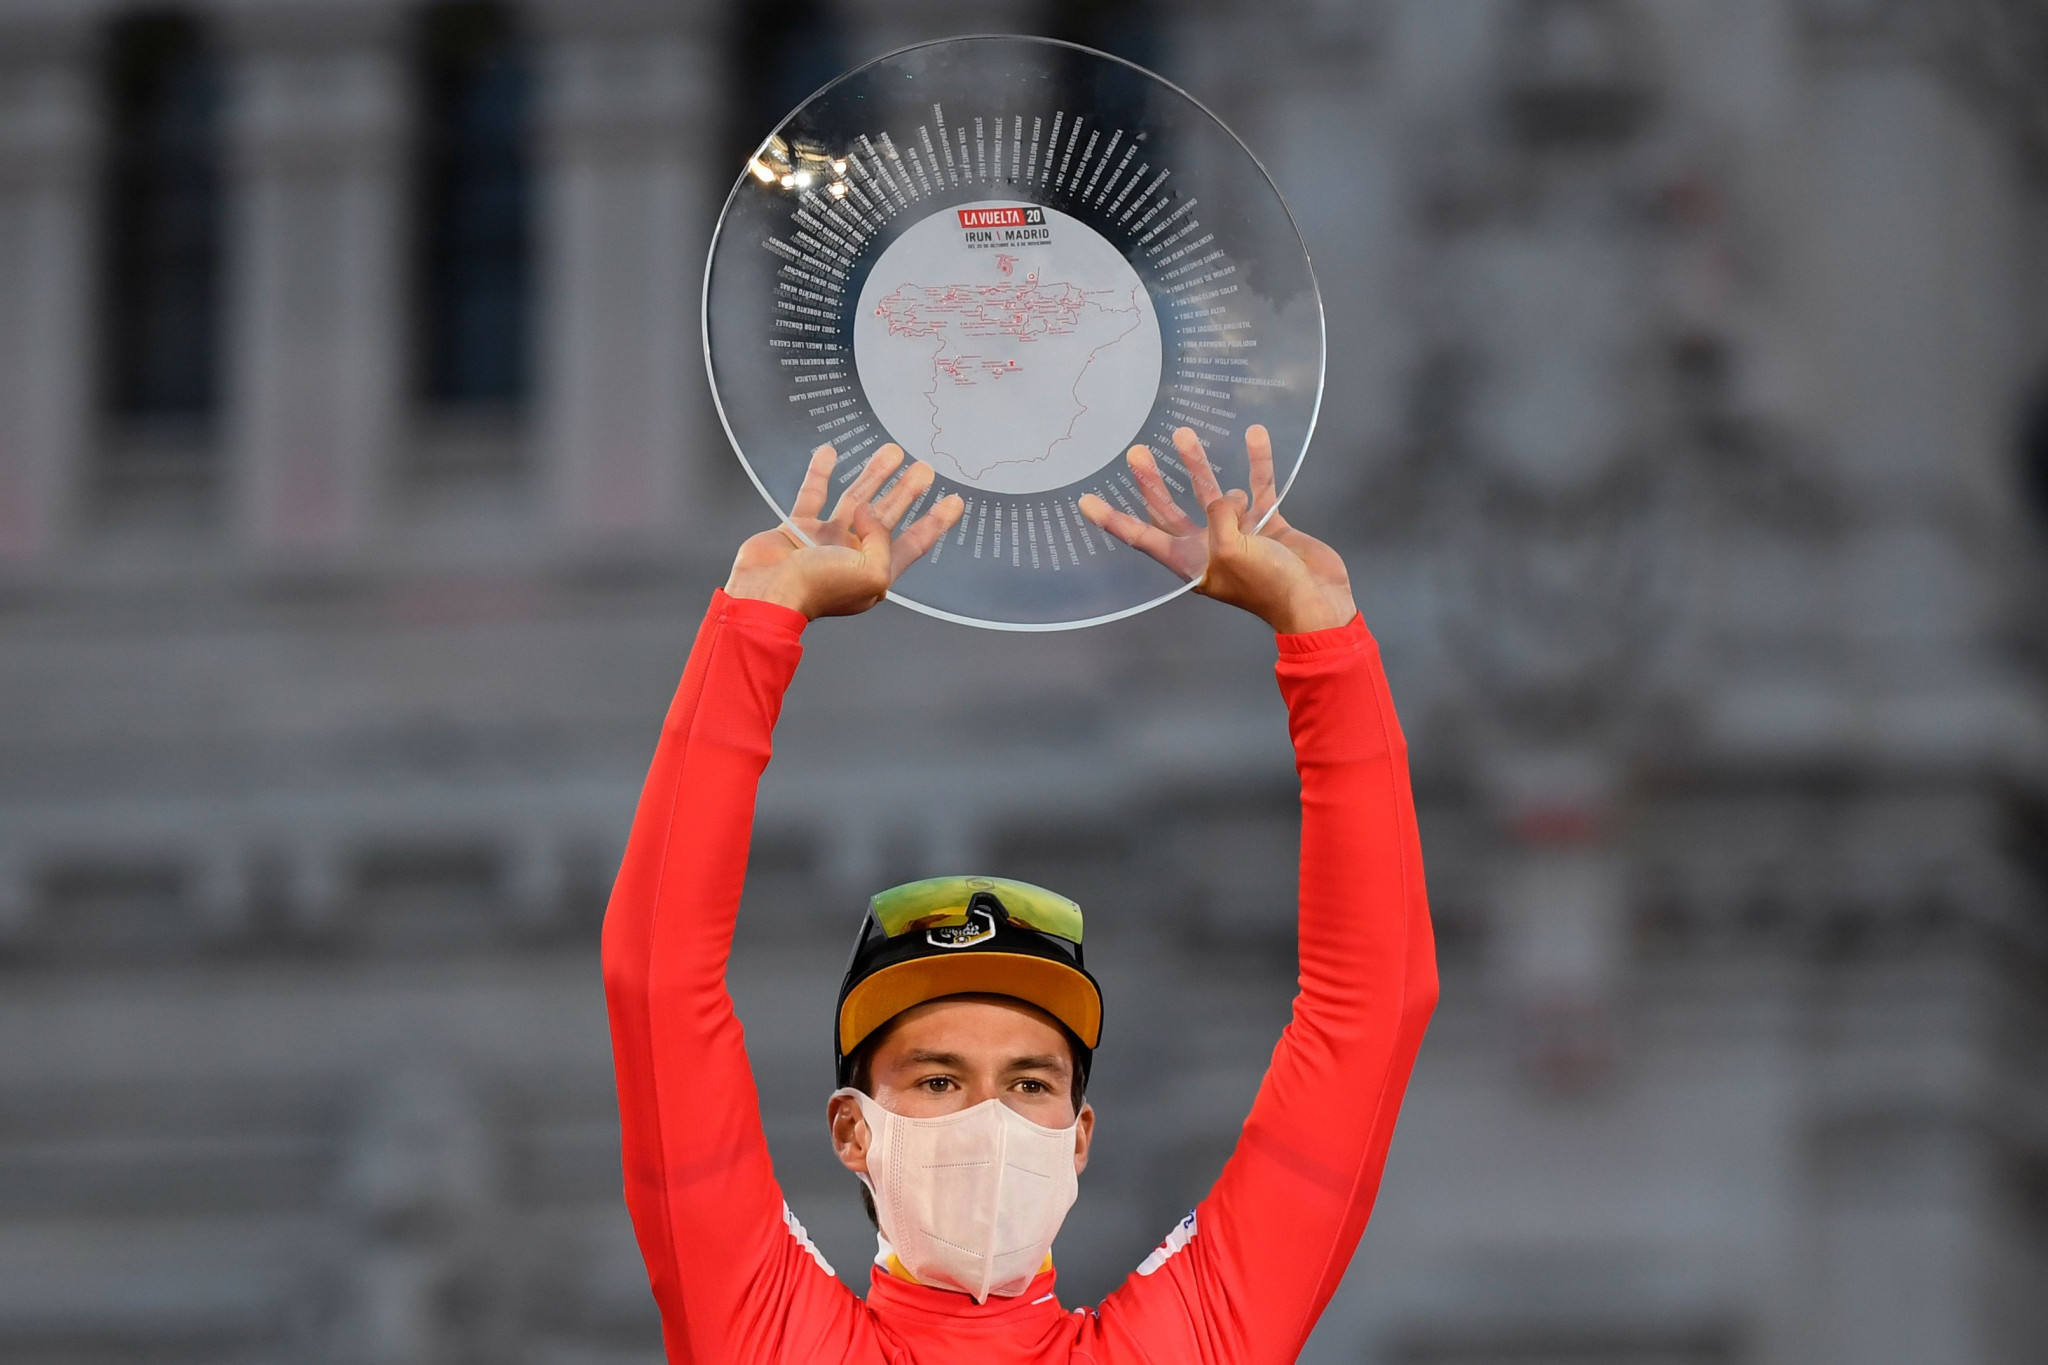 Primož Roglič won the Vuelta a Espana for the second consecutive year ©Getty Images